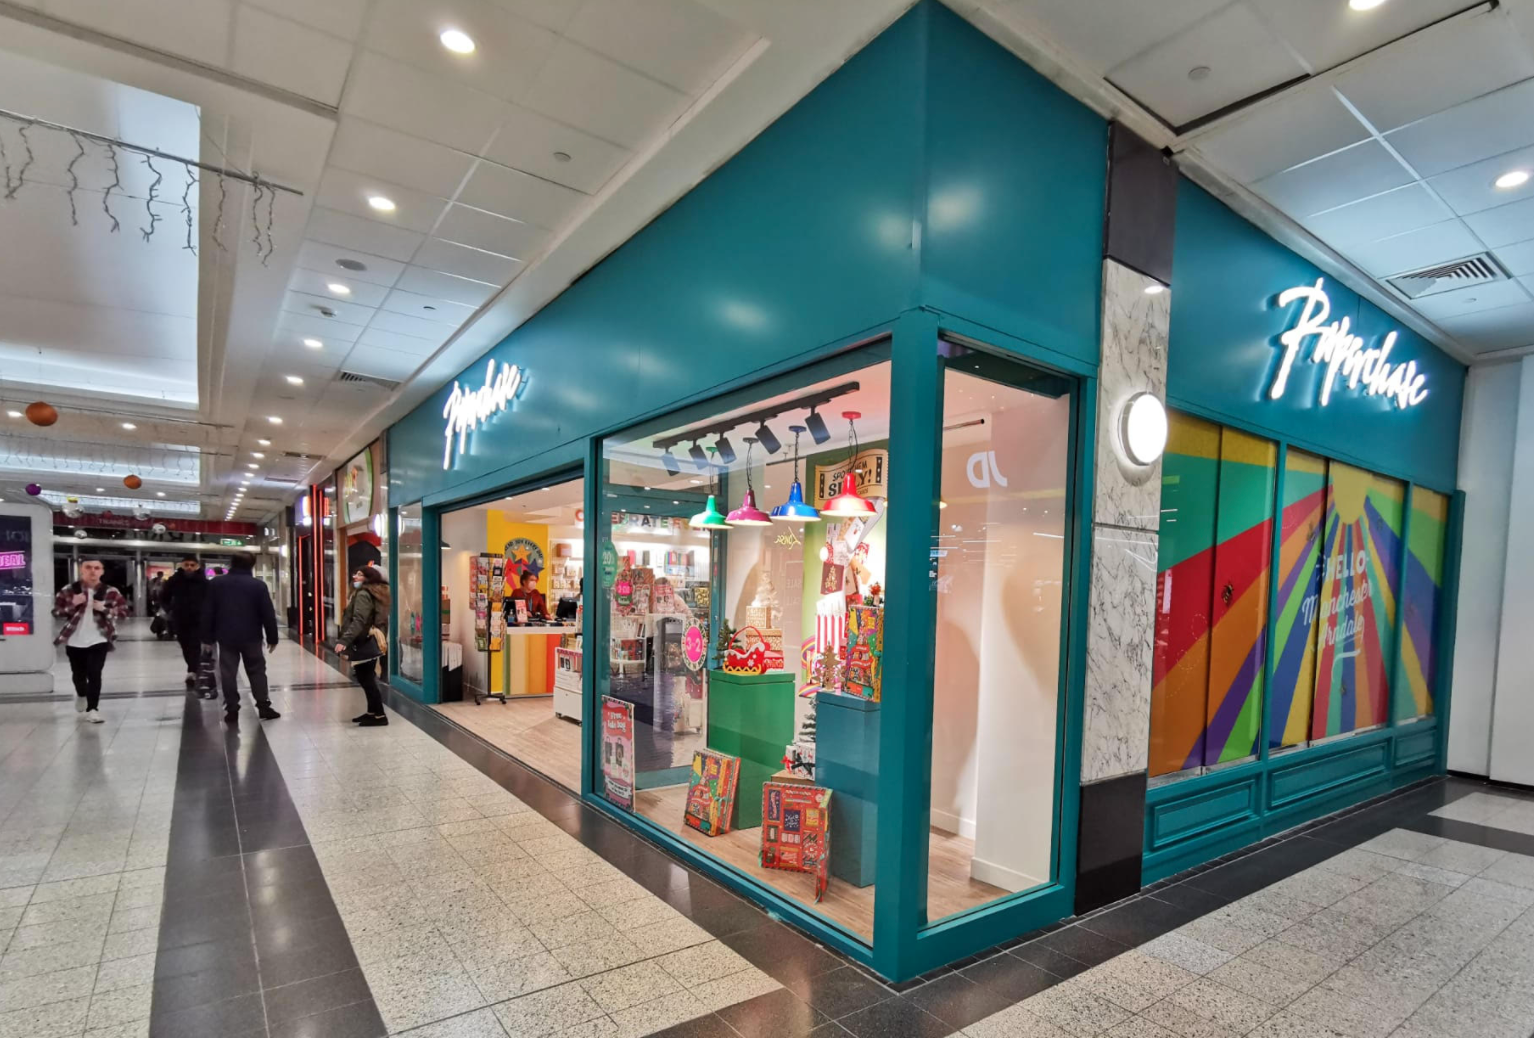 Paperchase has returned to Manchester after closing its massive flagship store, The Manc